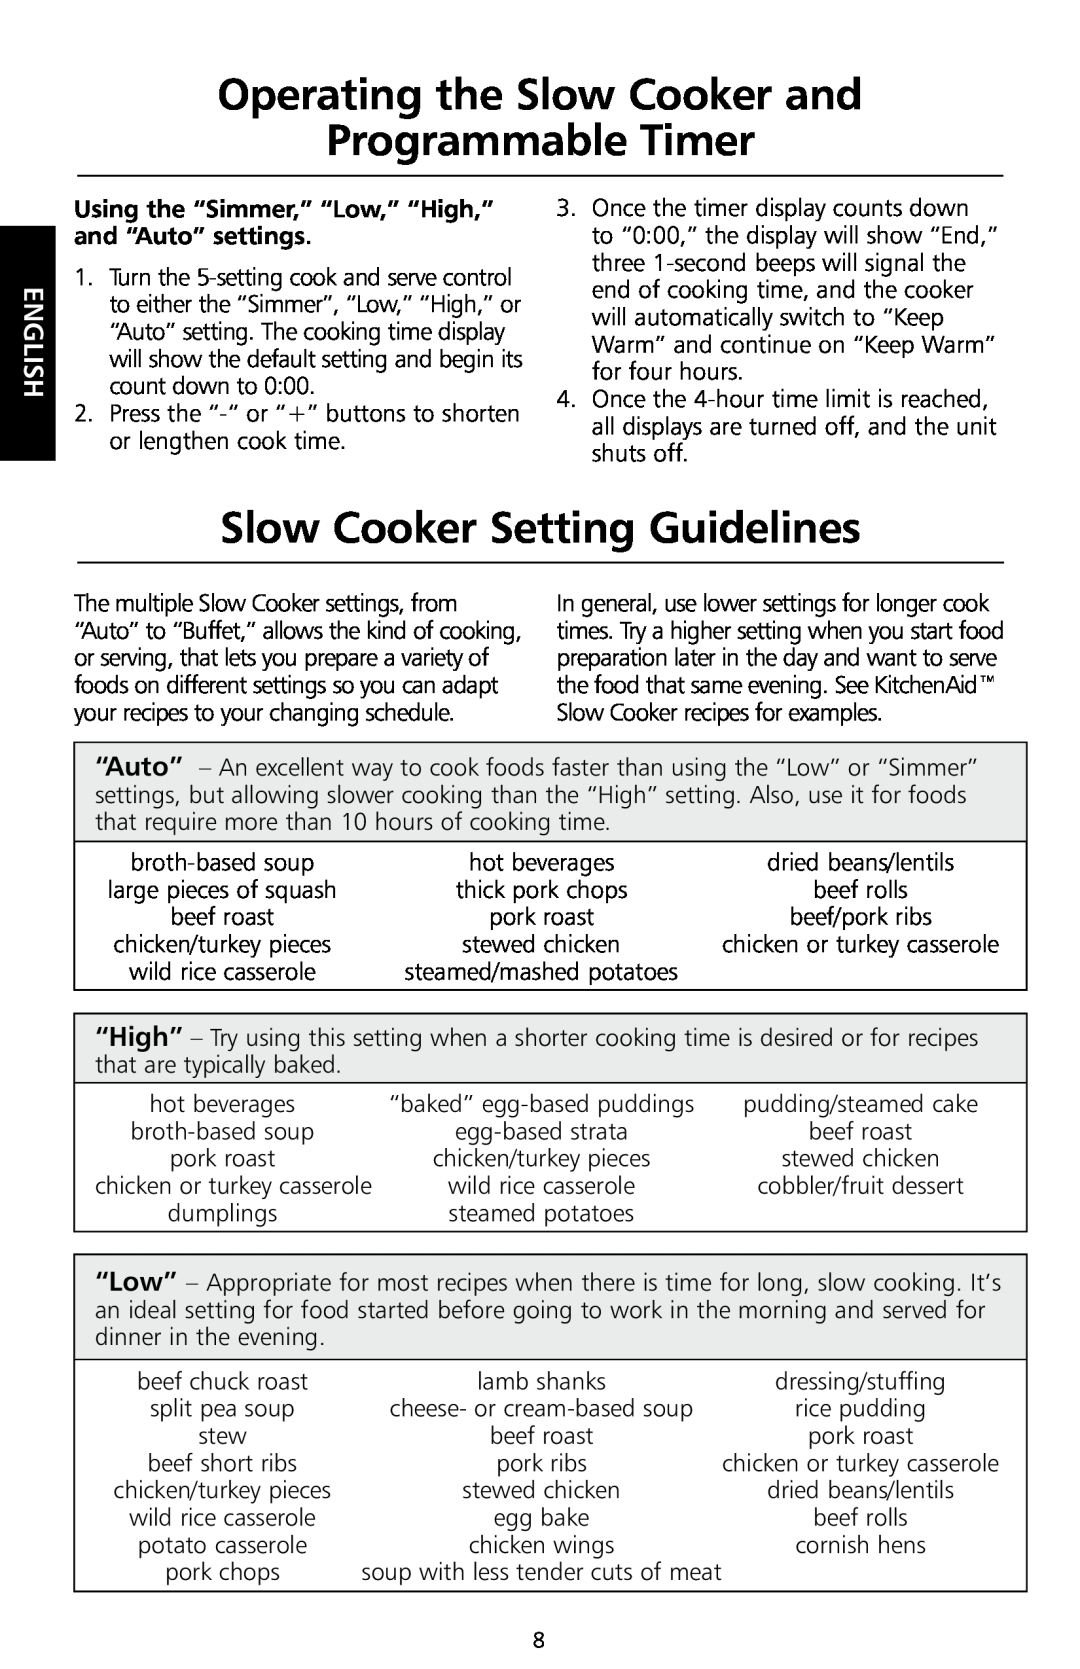 KitchenAid KSC700 manual Slow Cooker Setting Guidelines, Using the “Simmer,” “Low,” “High,” and “Auto” settings, English 